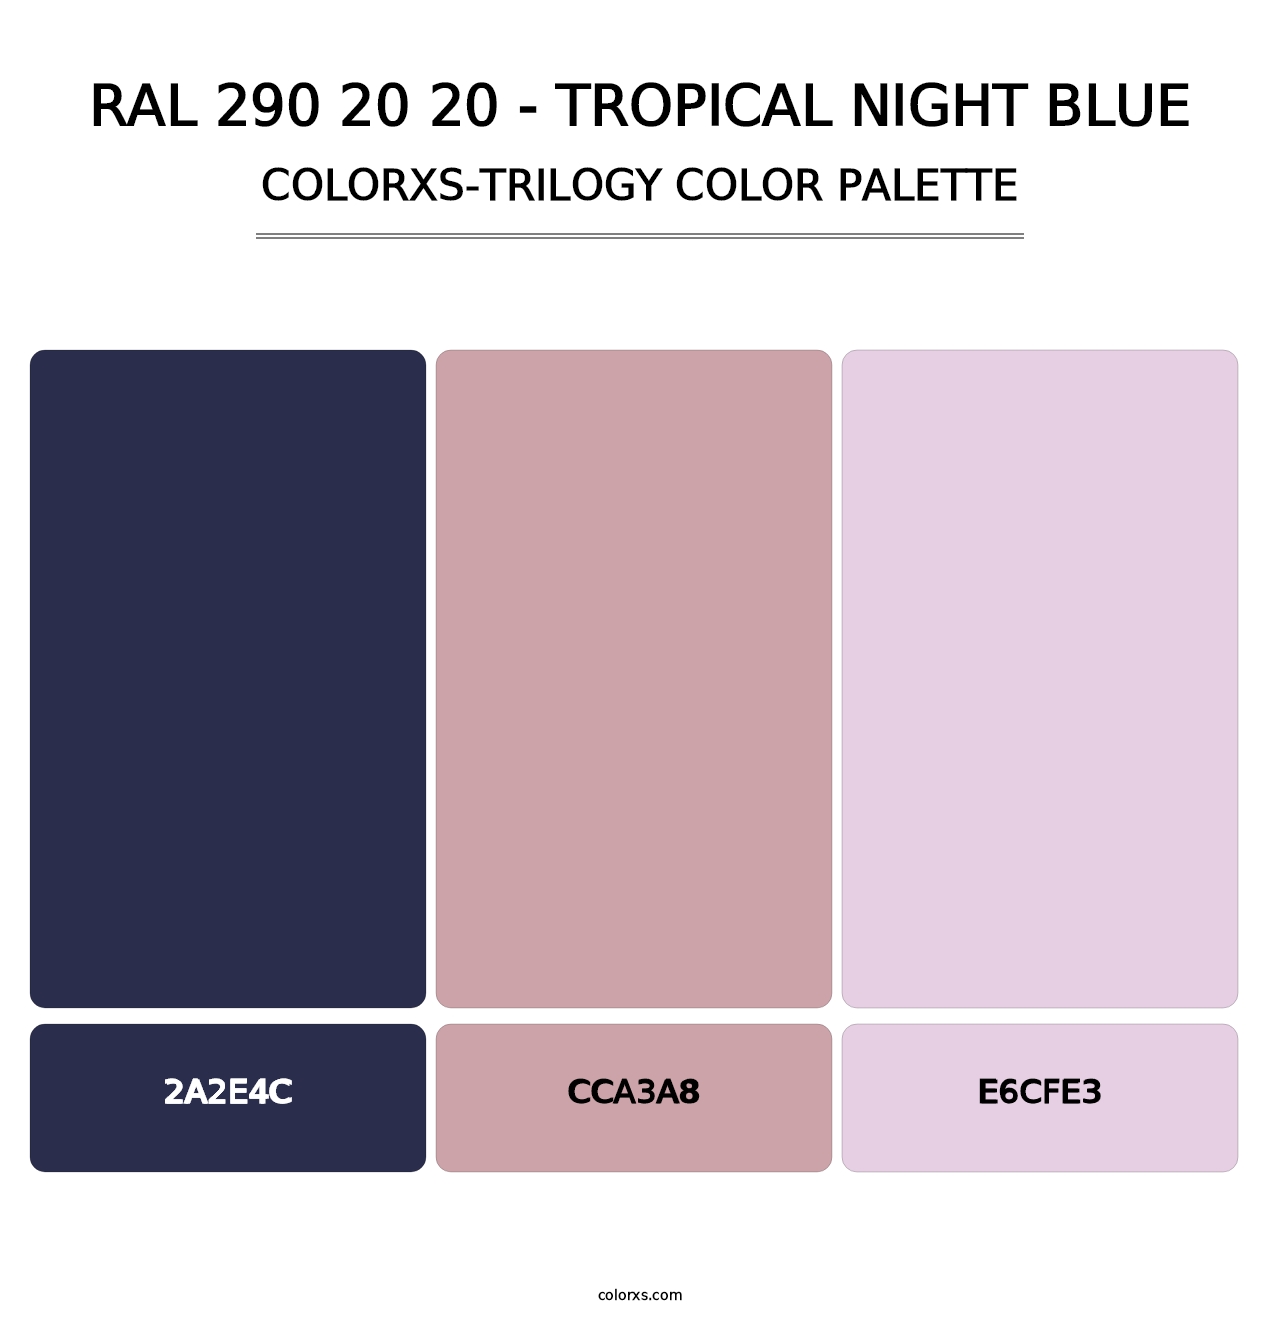 RAL 290 20 20 - Tropical Night Blue - Colorxs Trilogy Palette